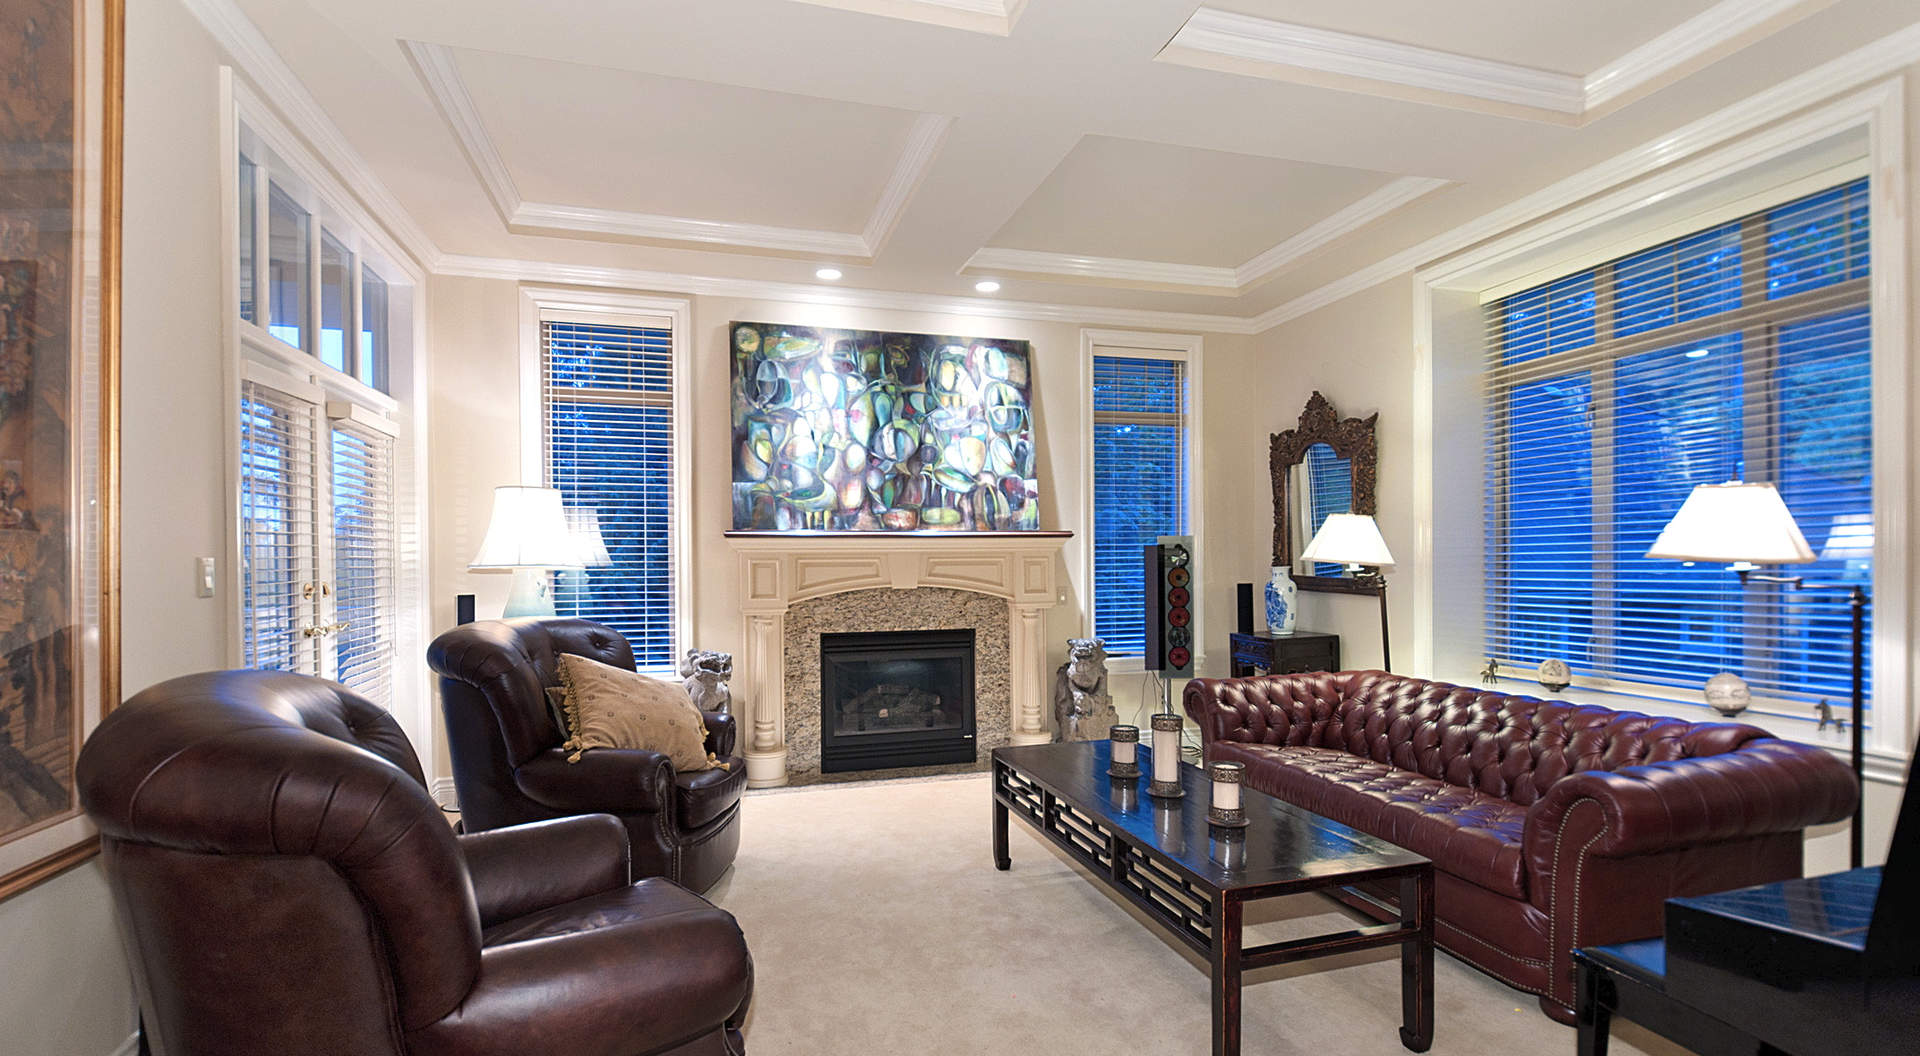 Traditional Living Area with Coffered Ceilings & Fireplace